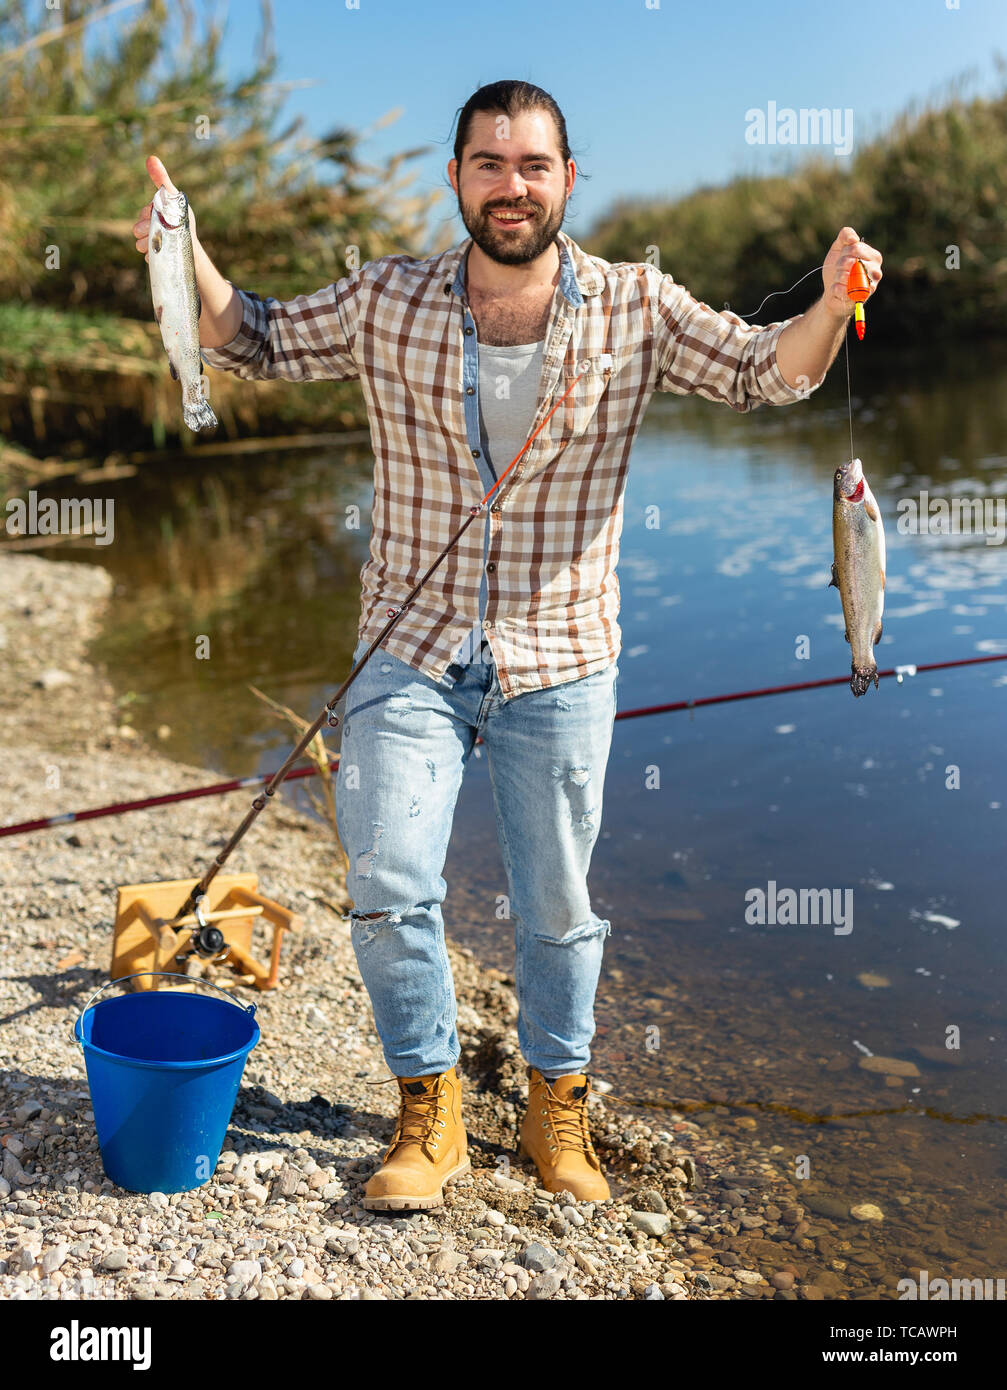 https://c8.alamy.com/comp/TCAWPH/bearded-adult-man-posing-with-fish-near-river-in-summertime-TCAWPH.jpg